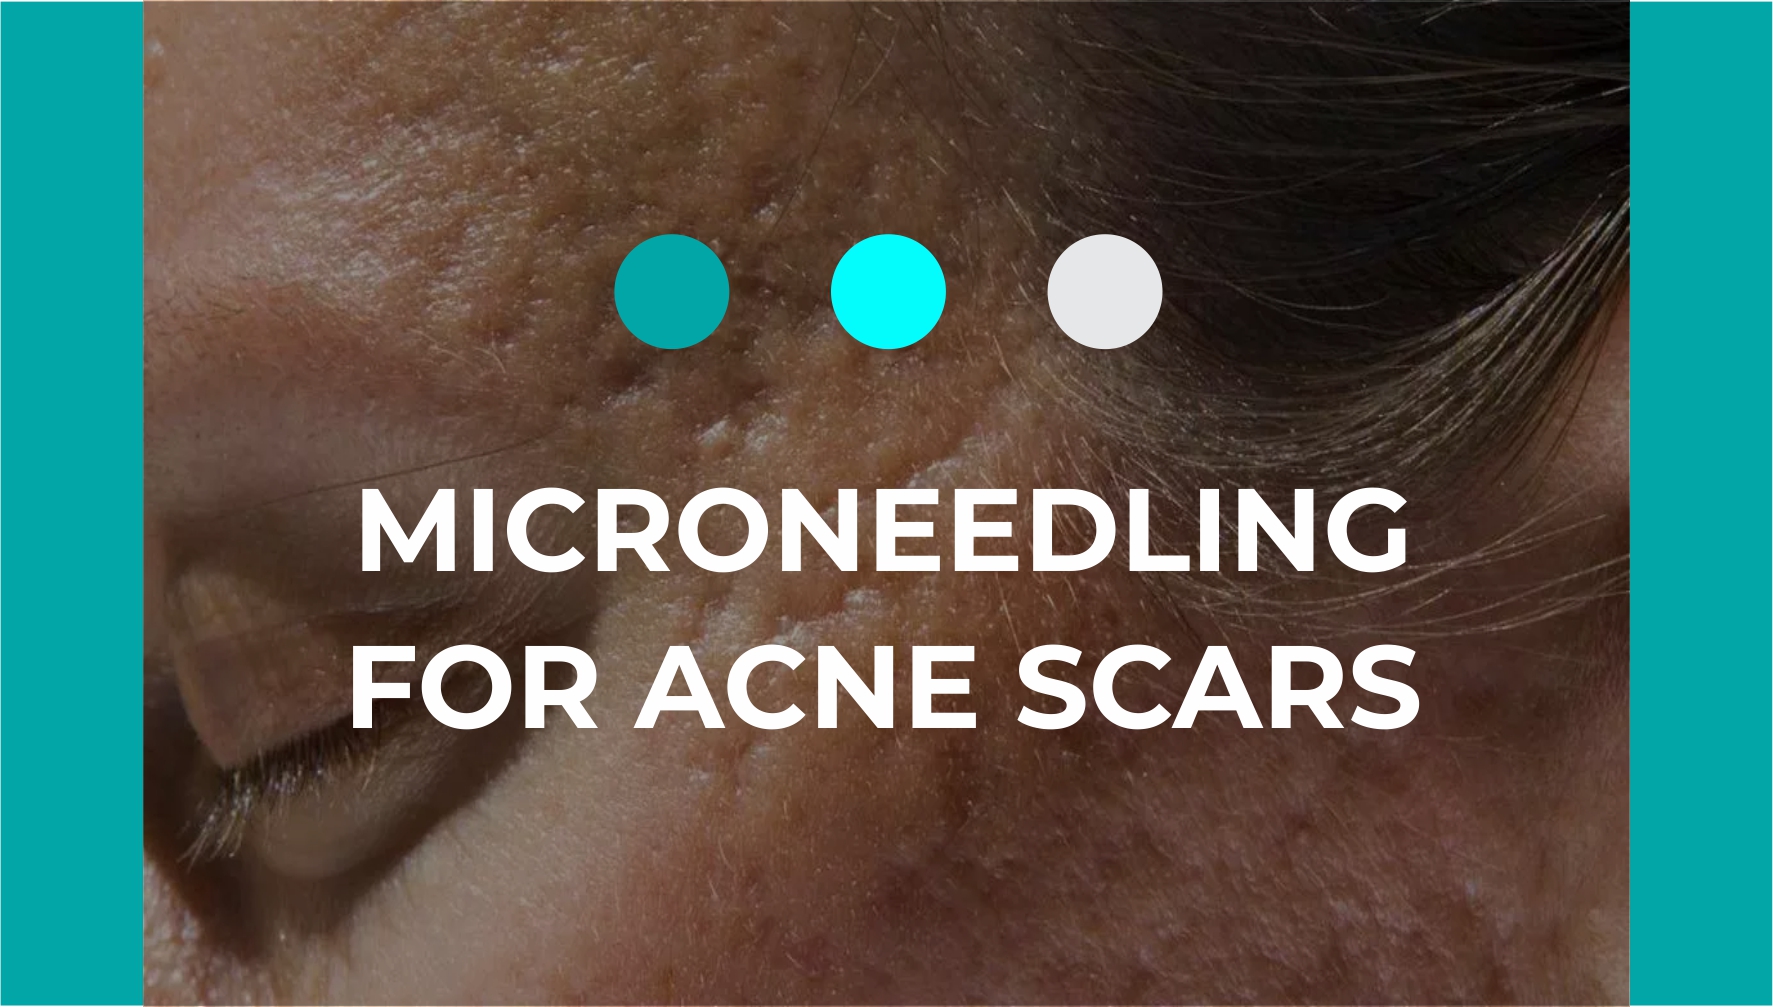 Is Microneedling Effective for Acne Scars?